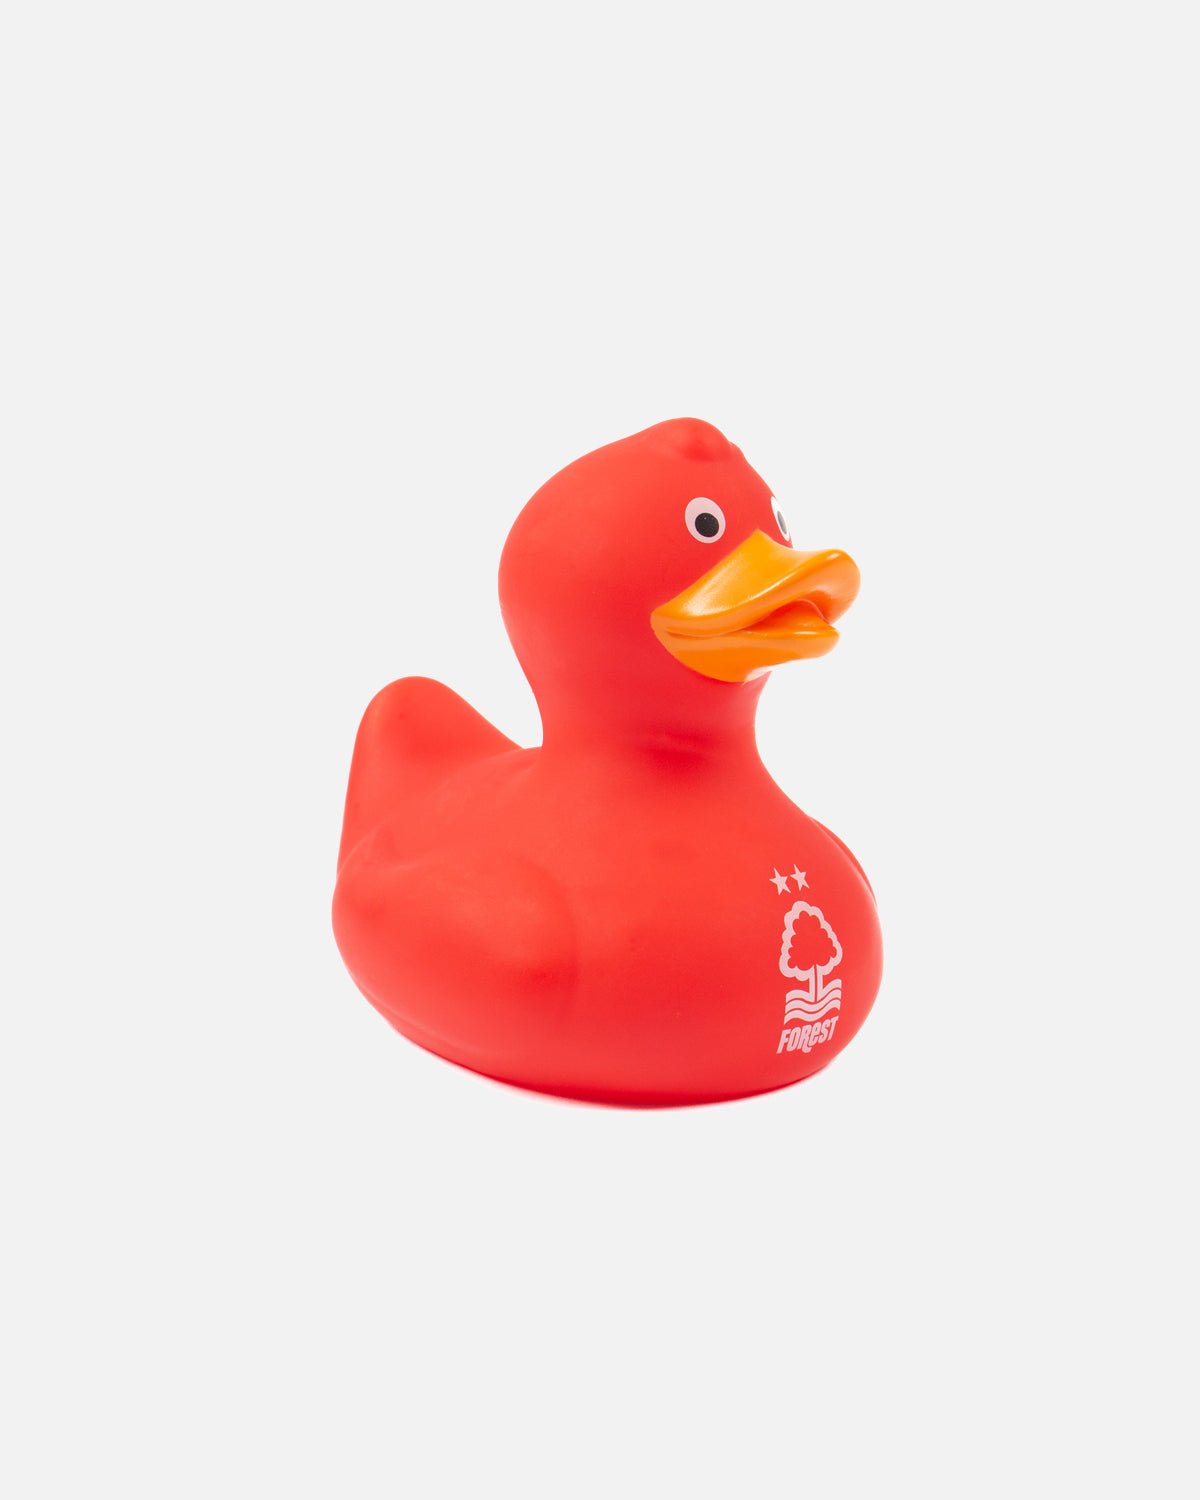 NFFC Rubber Duck - Nottingham Forest FC